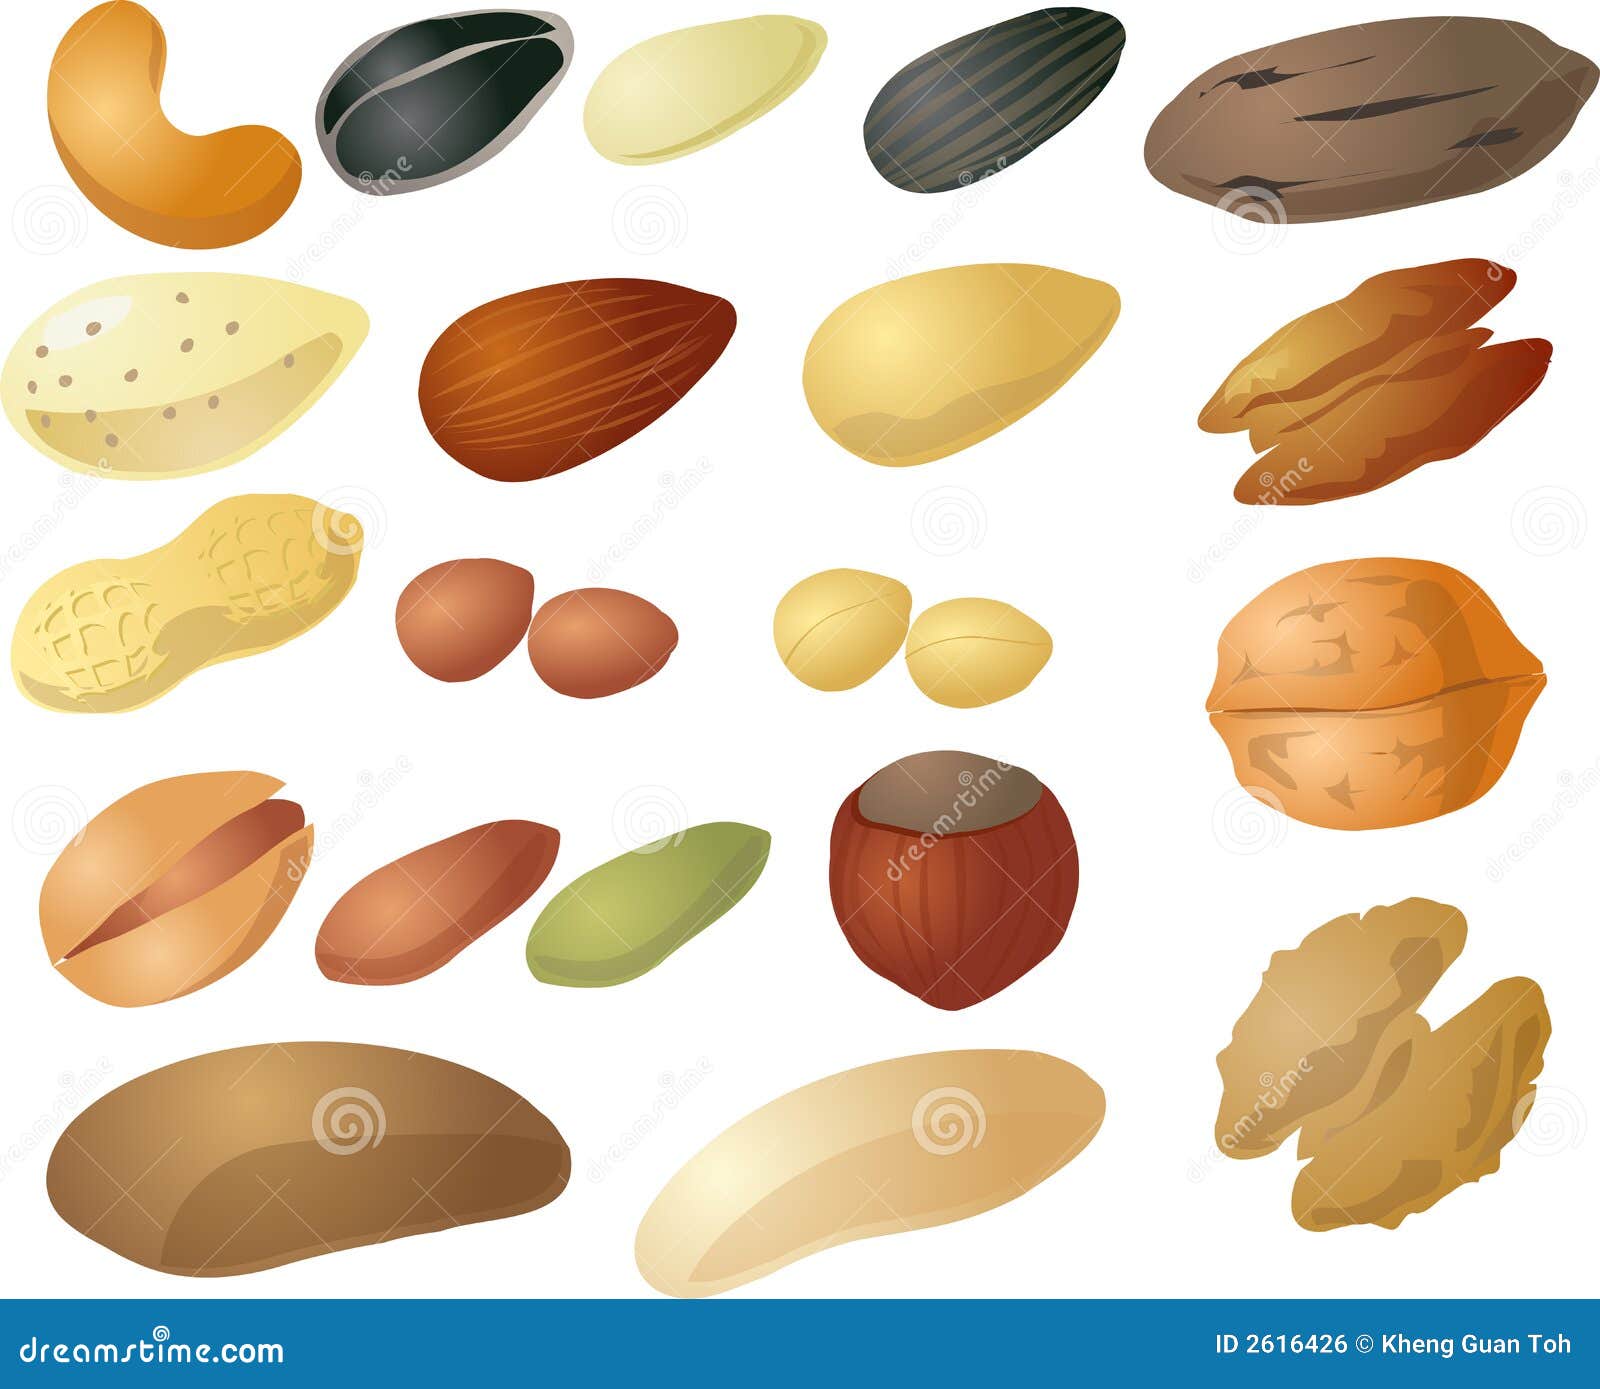 Nuts Seeds Stock Illustrations – 8,205 Nuts Seeds Stock